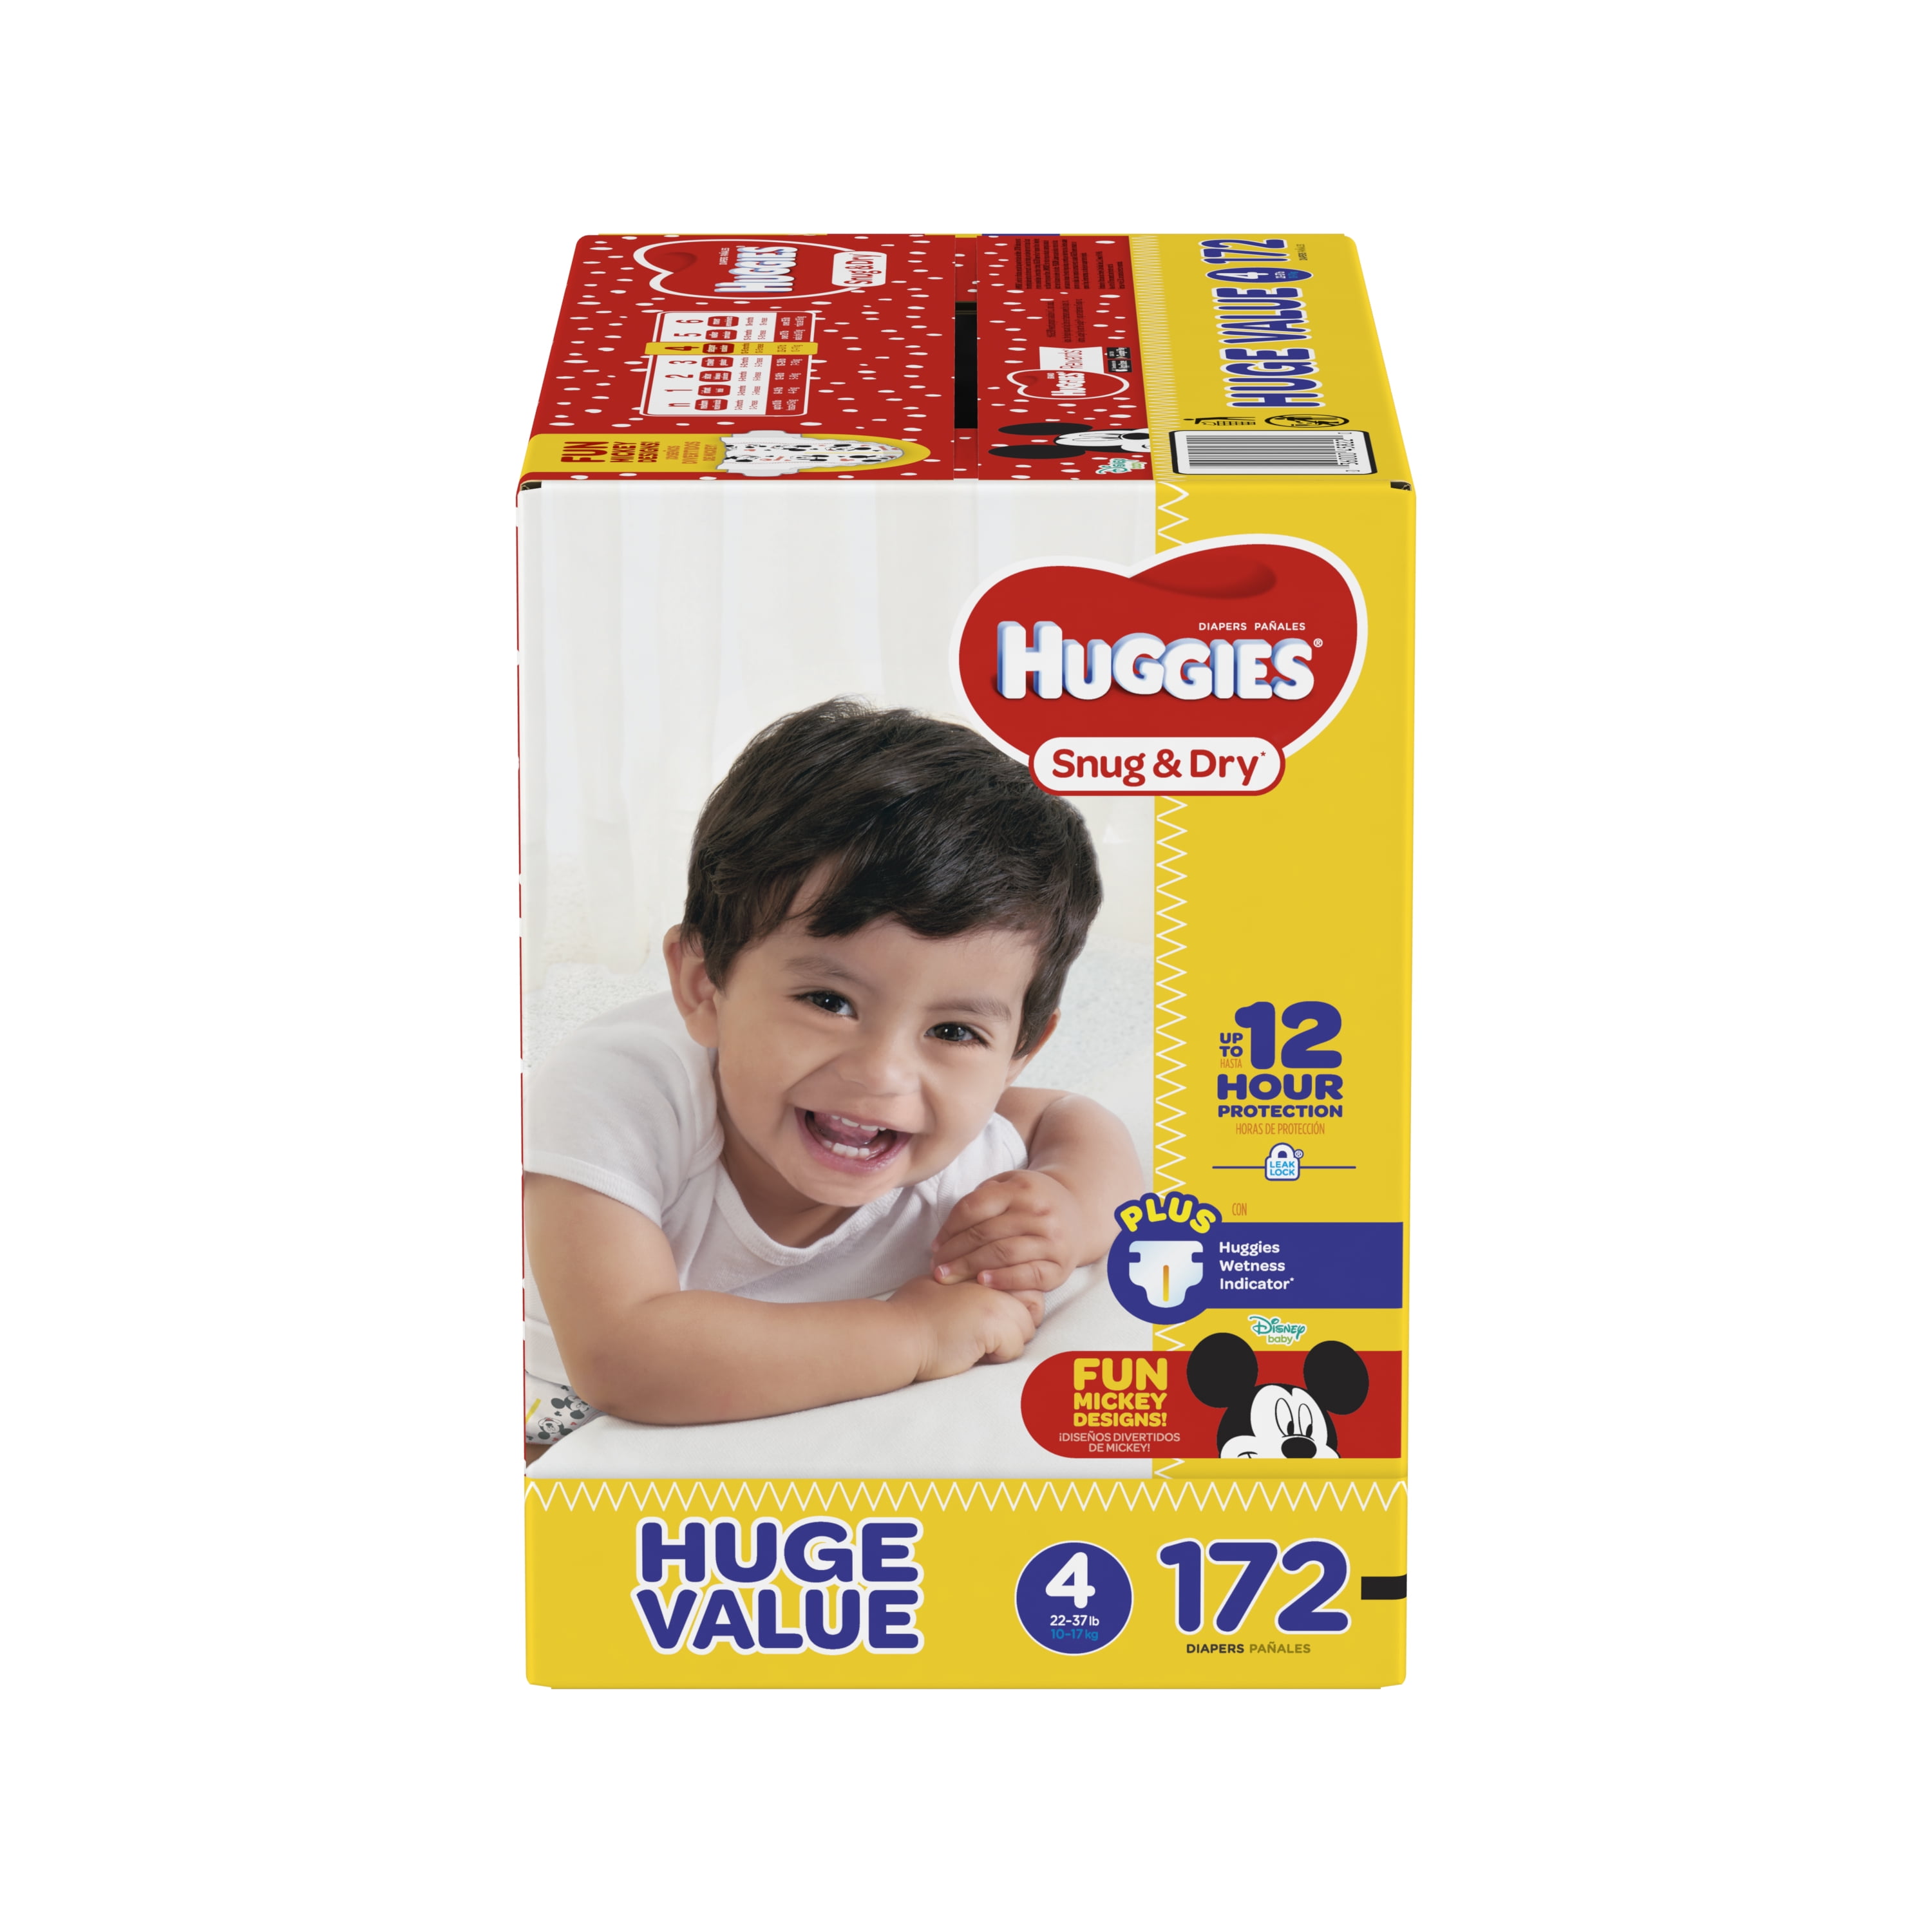 HUGGIES Snug & Dry Baby Diapers 192 Count fits 22-37 lbs. Size 4 Economy... 